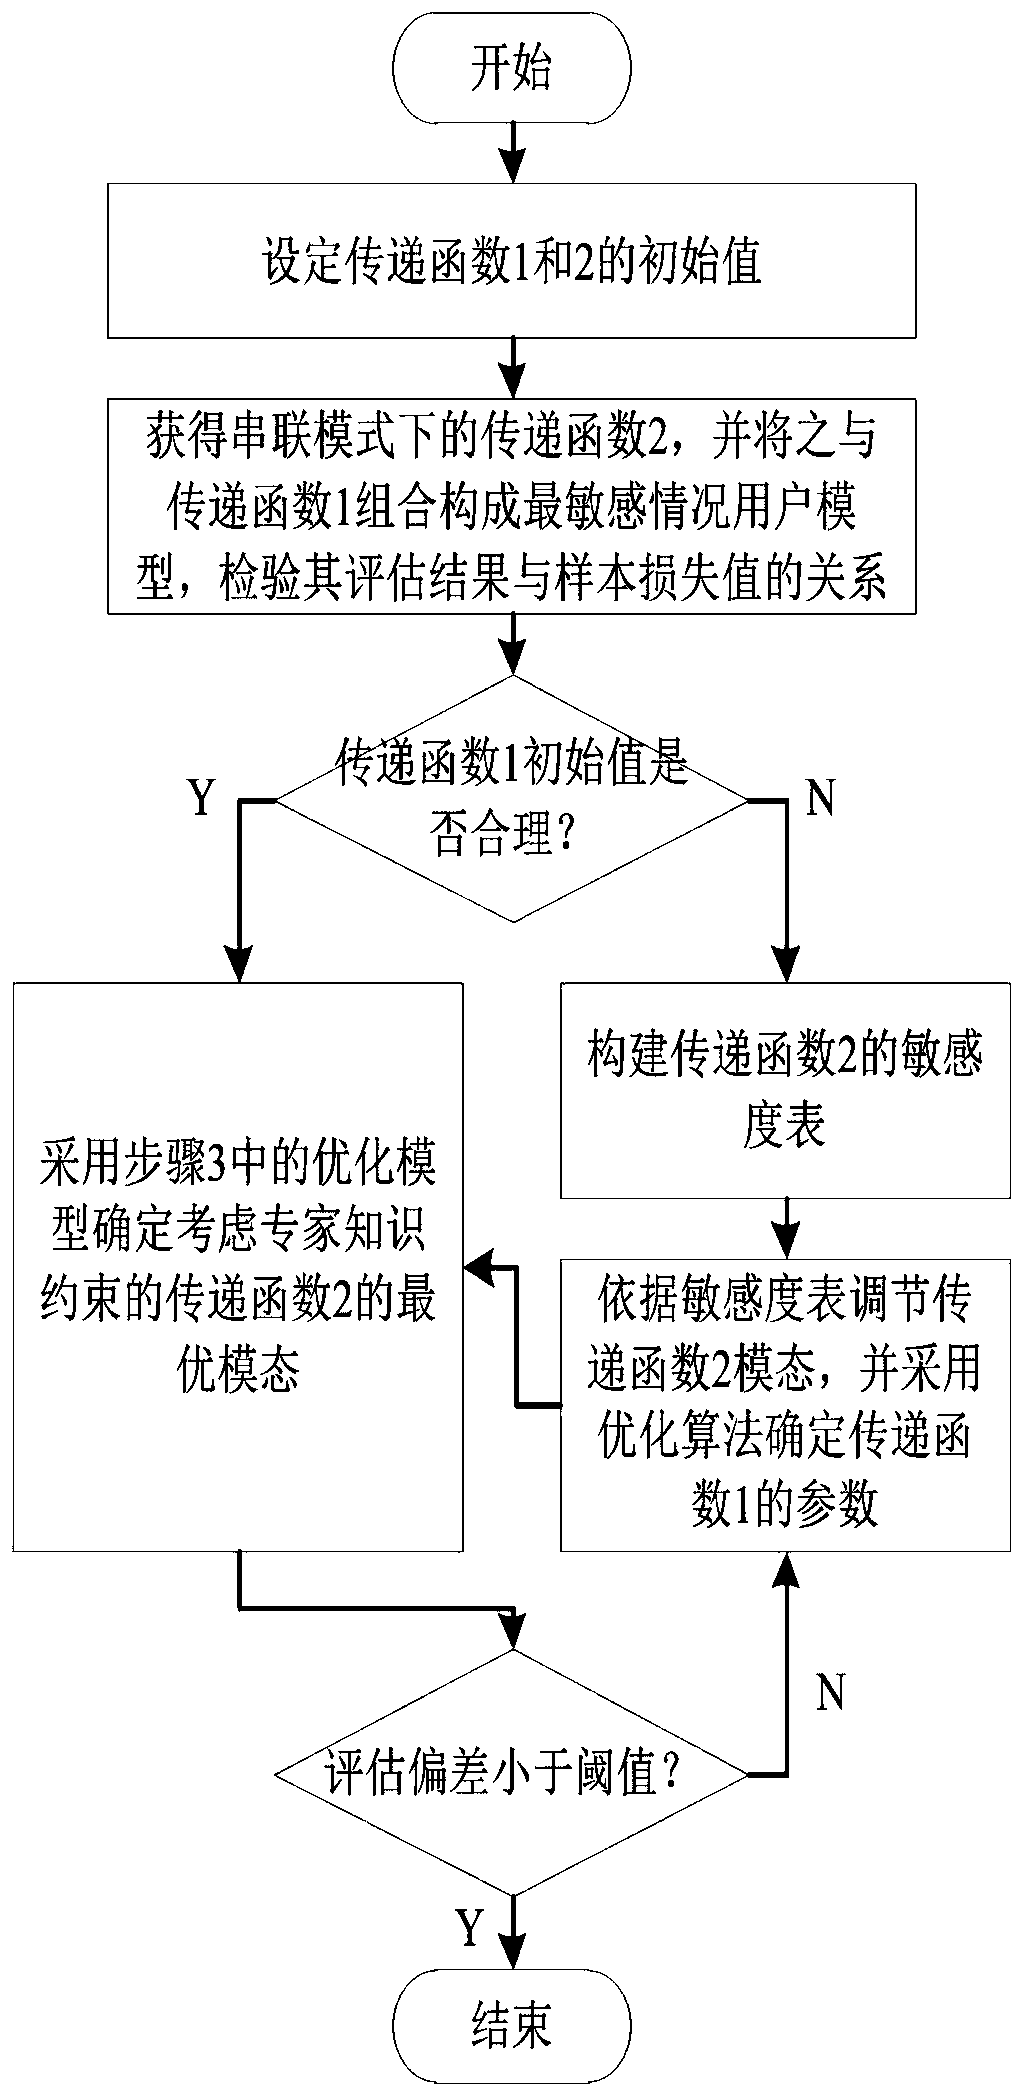 Industrial process modeling method for evaluating and governing sag and short-time interruption severity